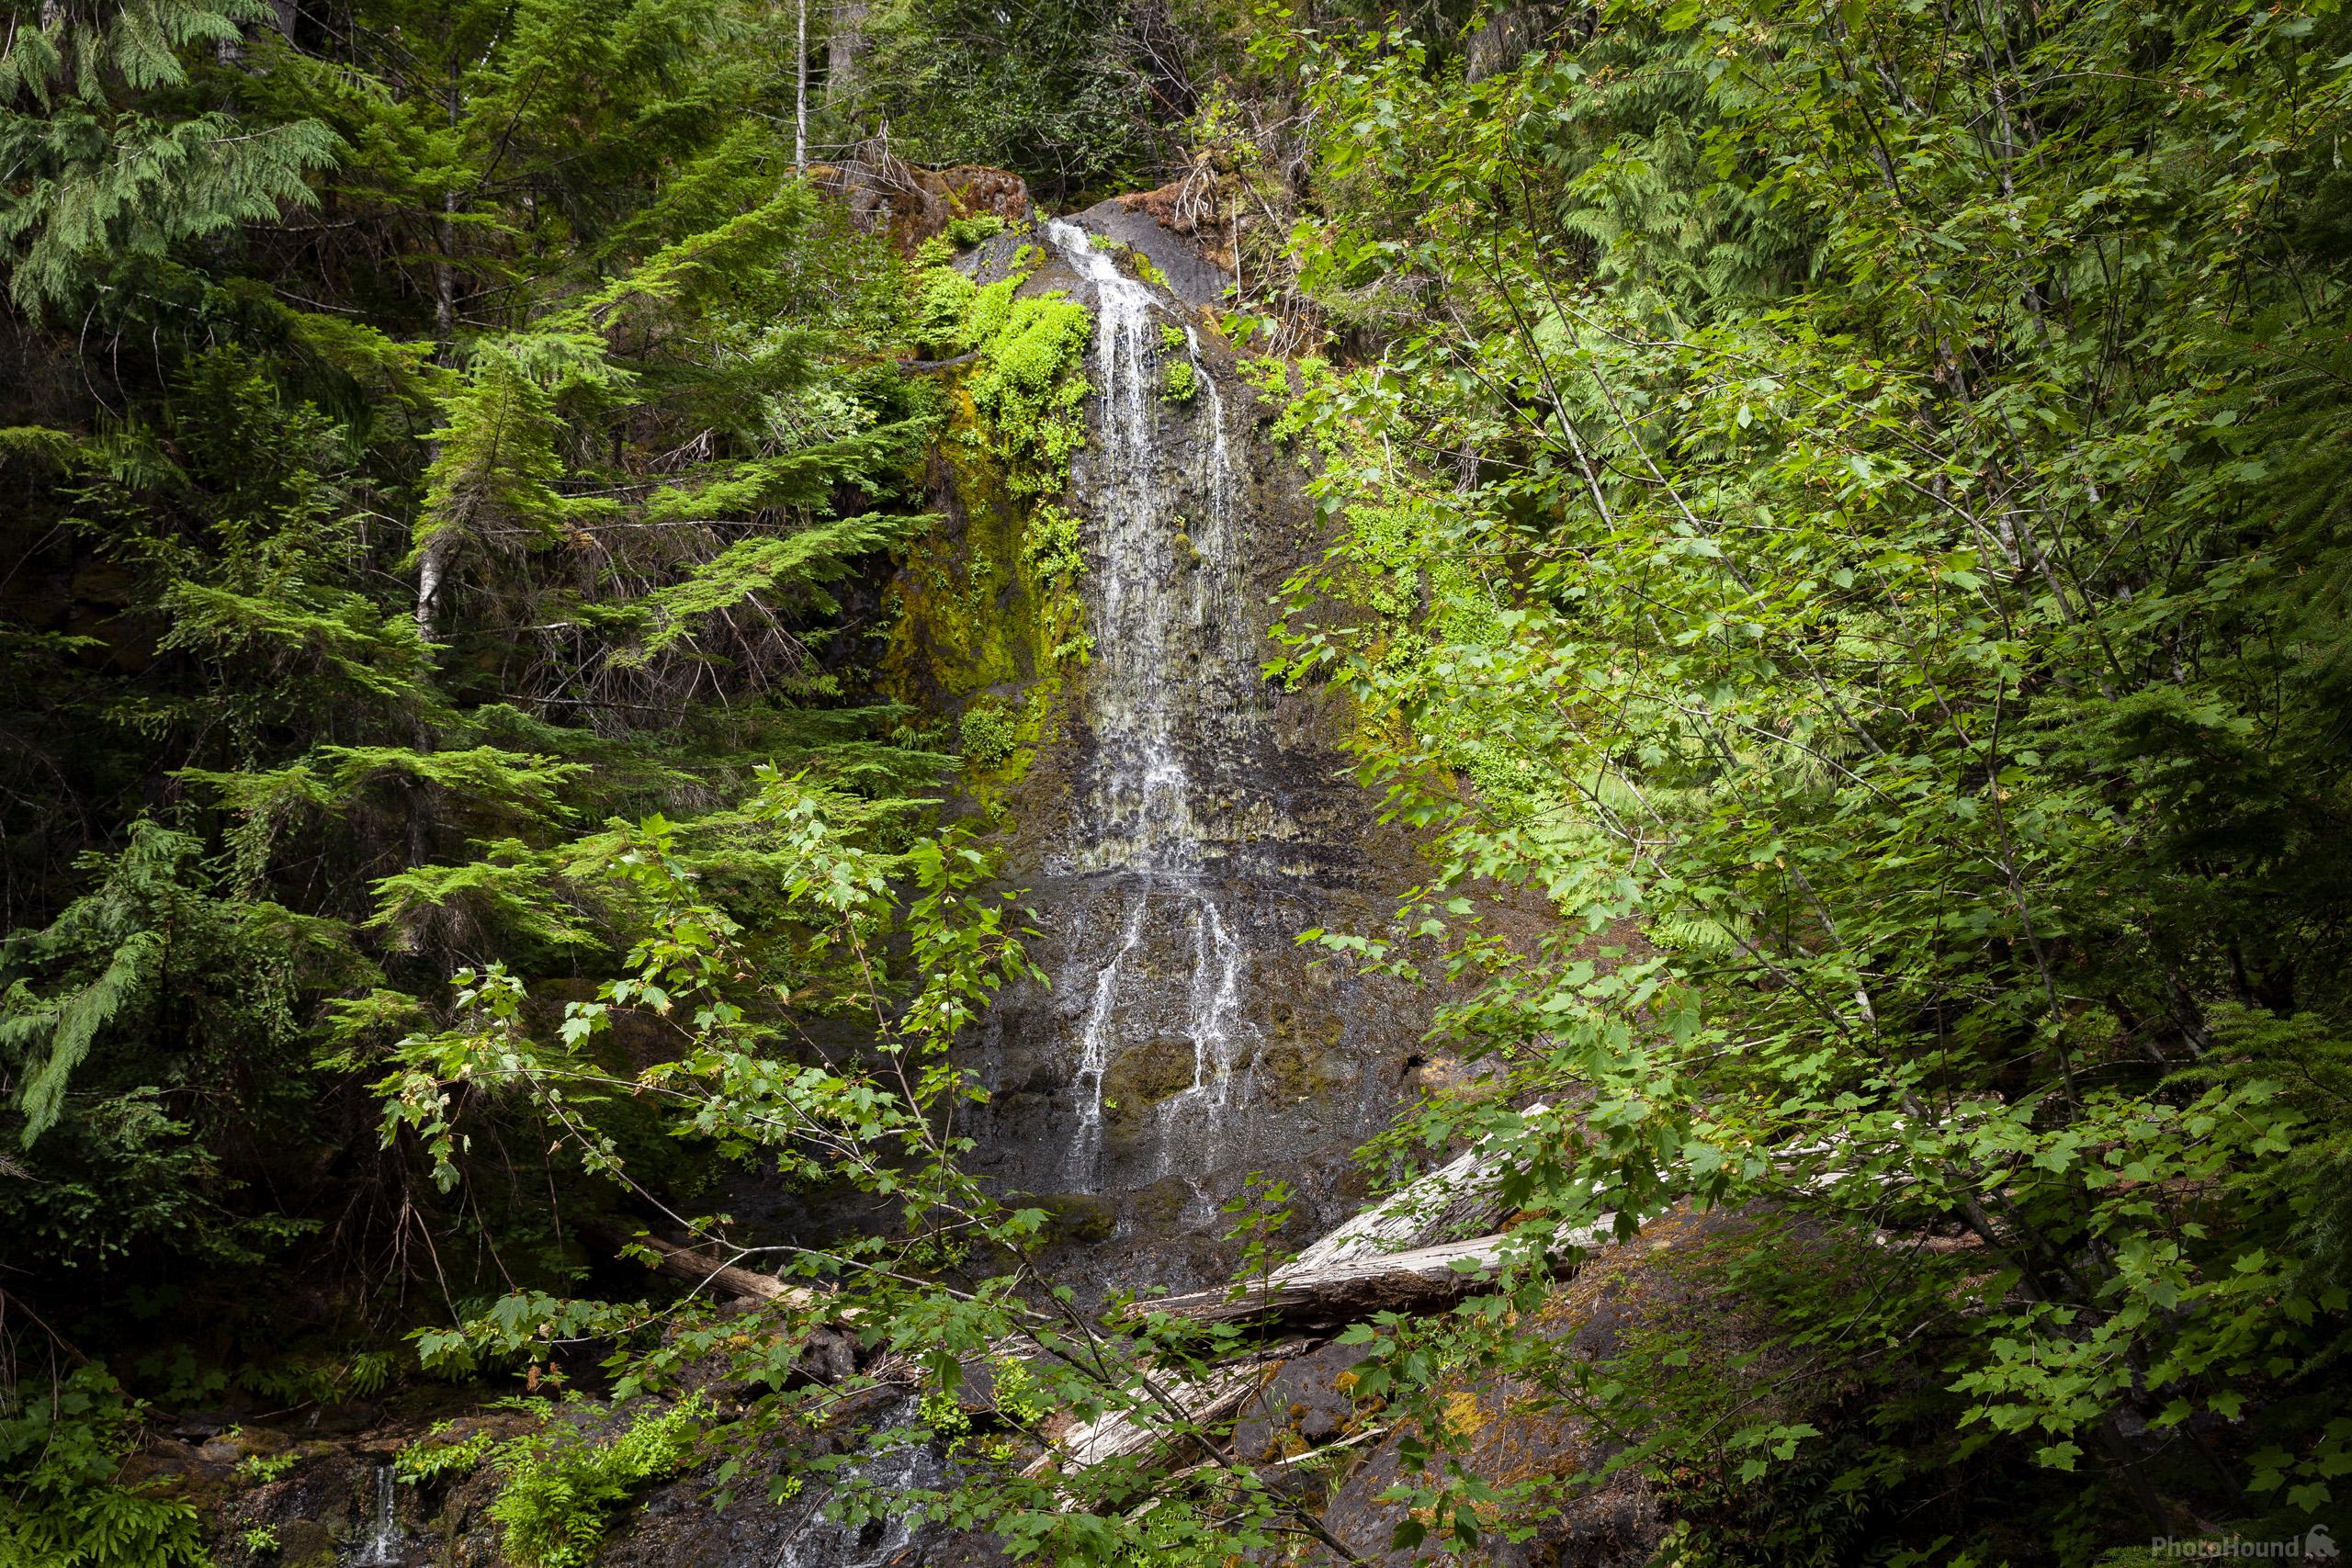 Image of Falls Creek Falls, Mount Rainier National Park by T. Kirkendall and V. Spring